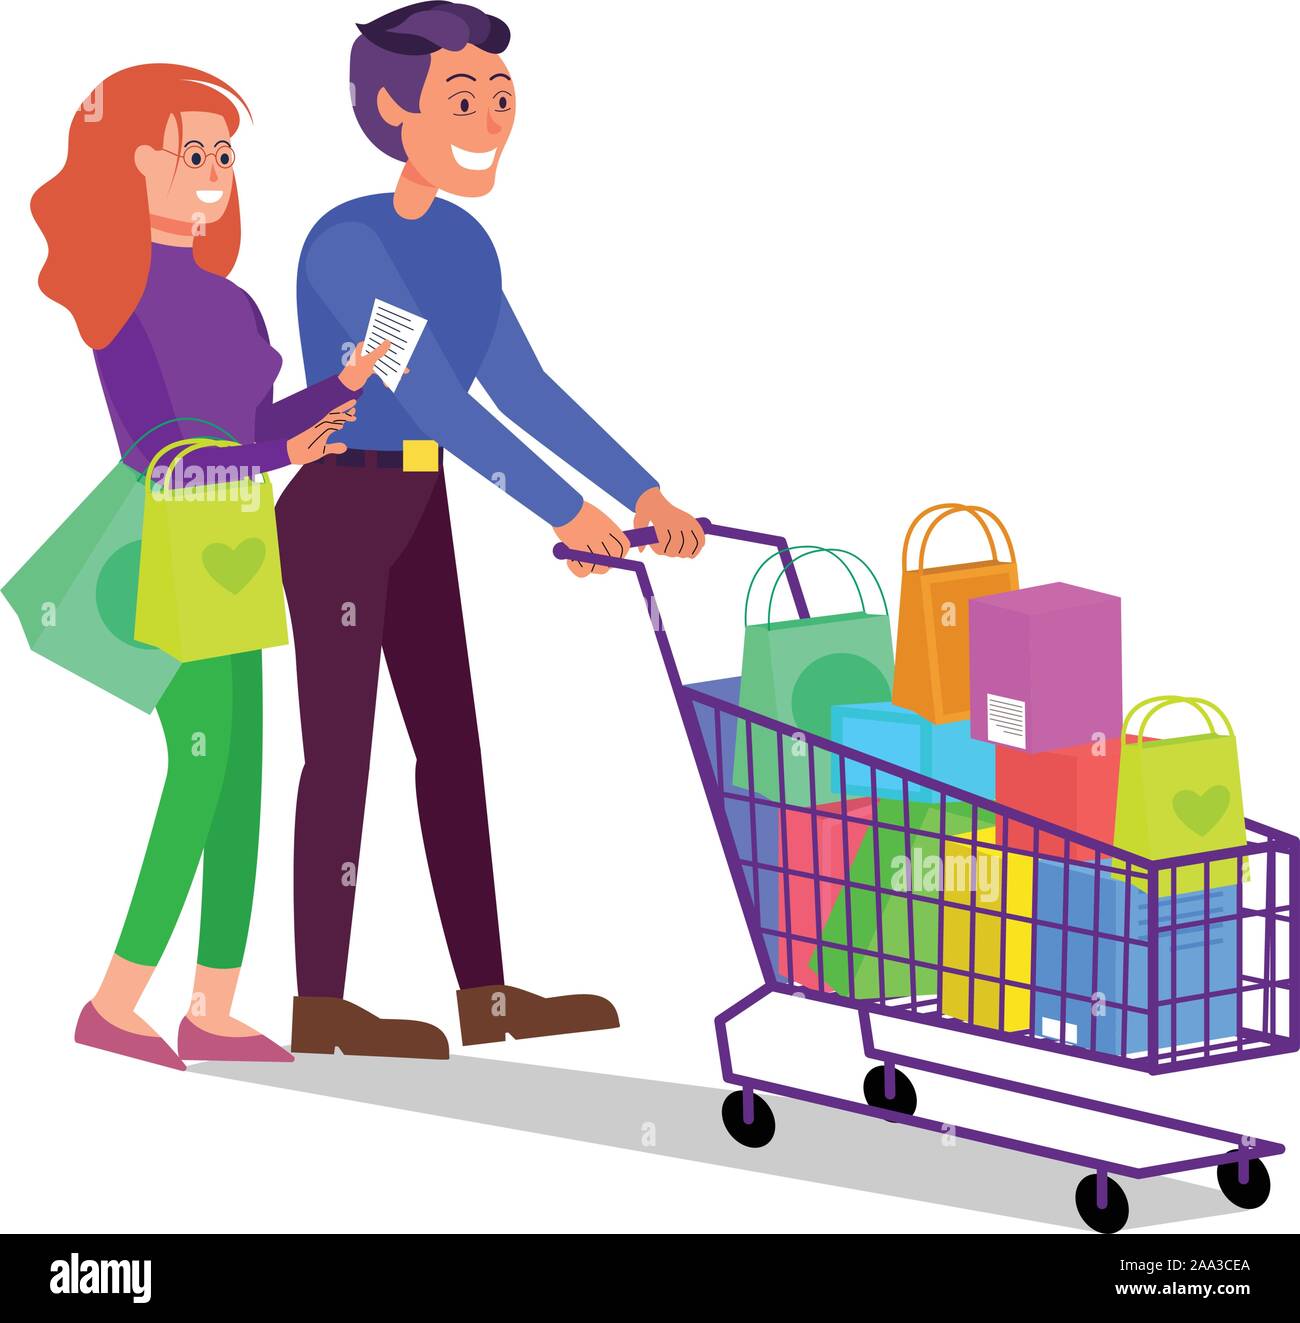 Shopping Cart Lifestyle - a Royalty Free Stock Photo from Photocase